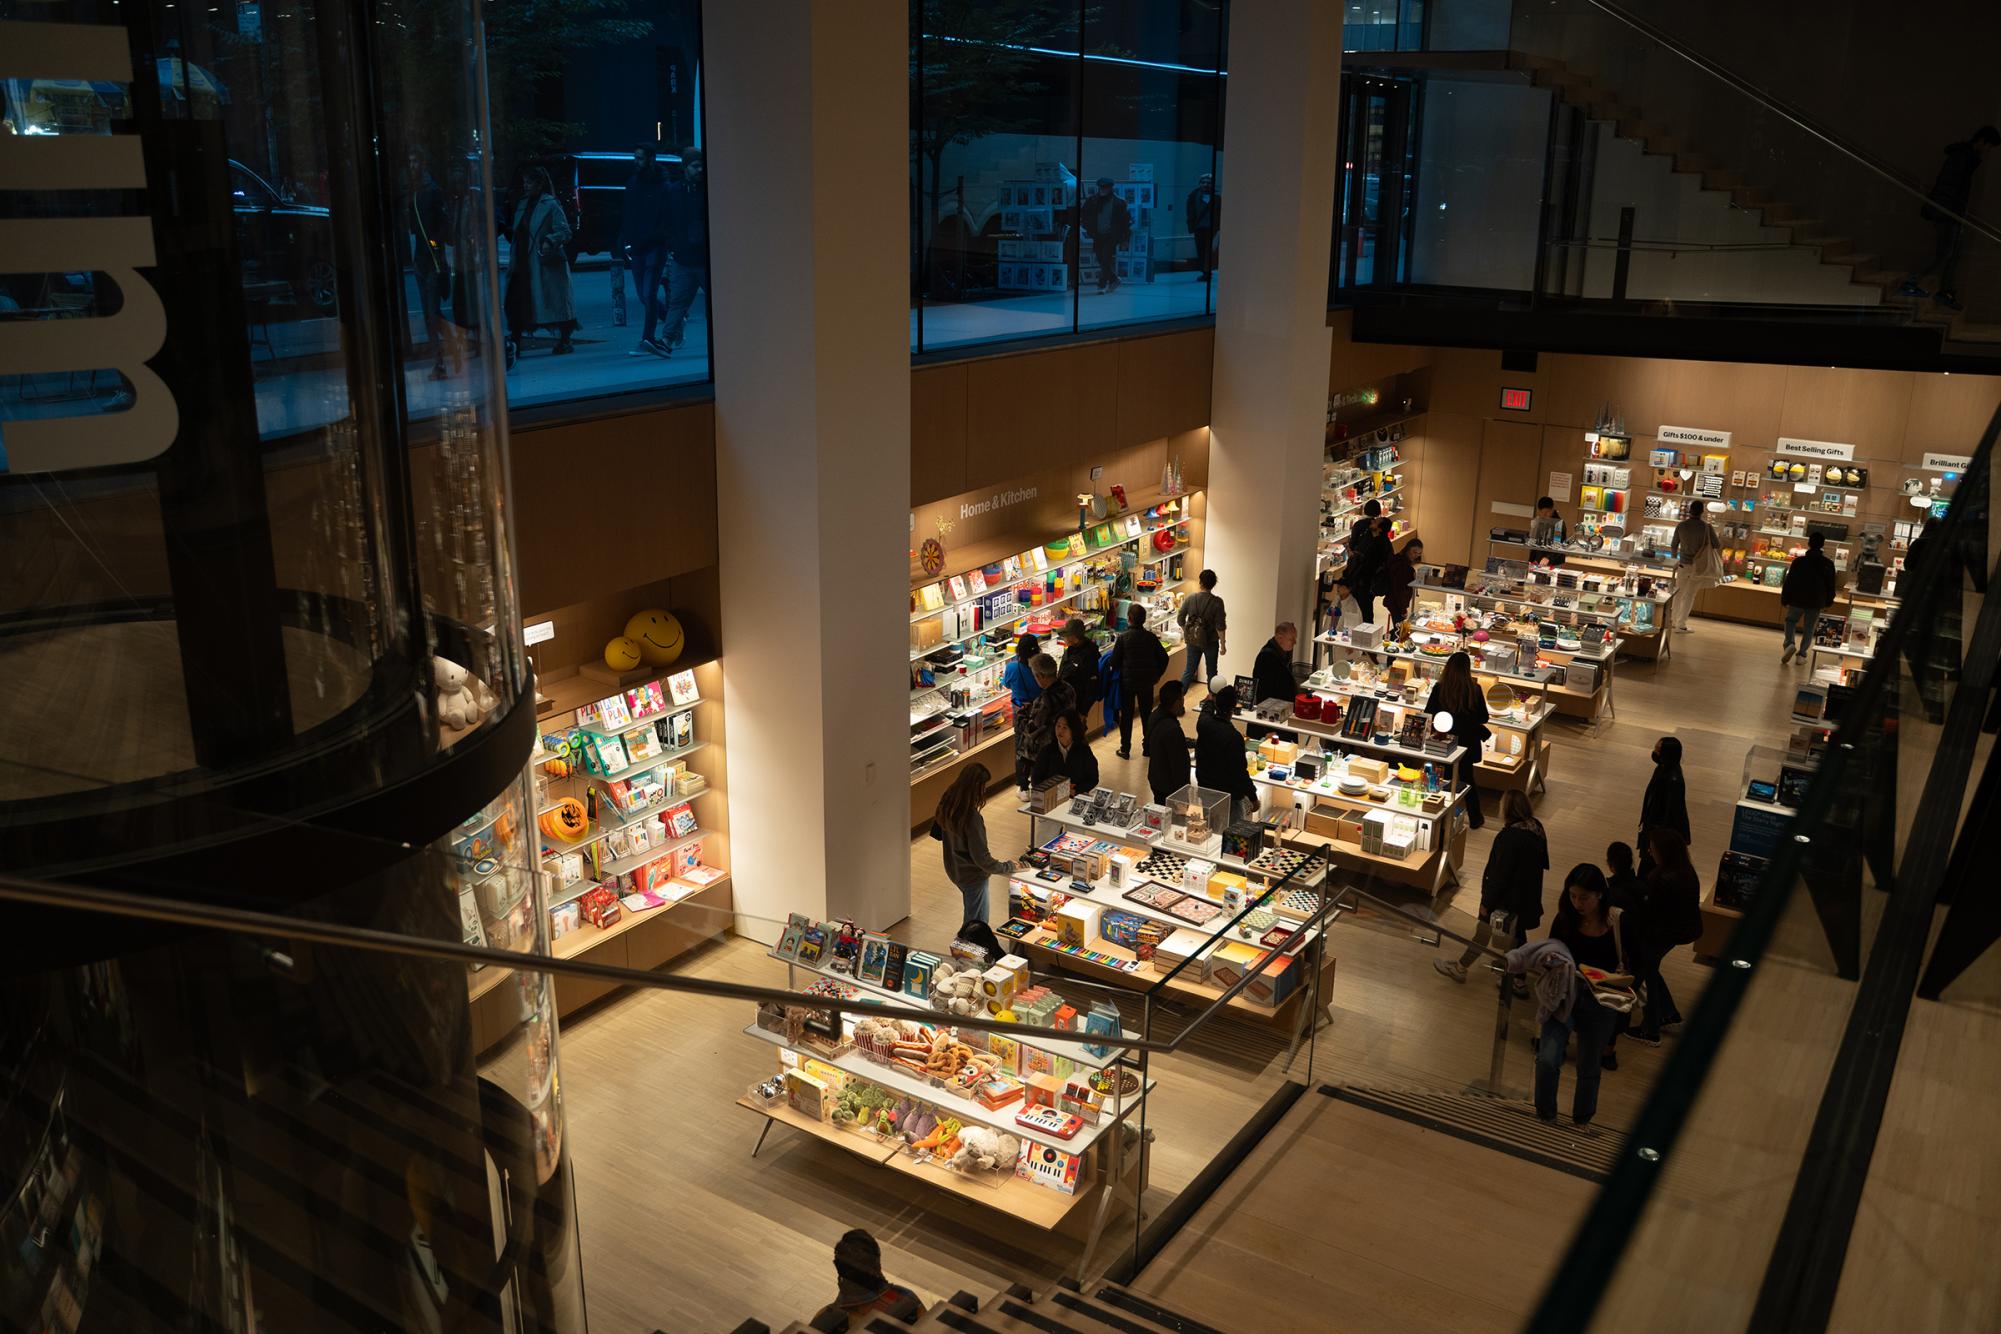 Aerial shot of The Museum of Modern Art's gift shop.